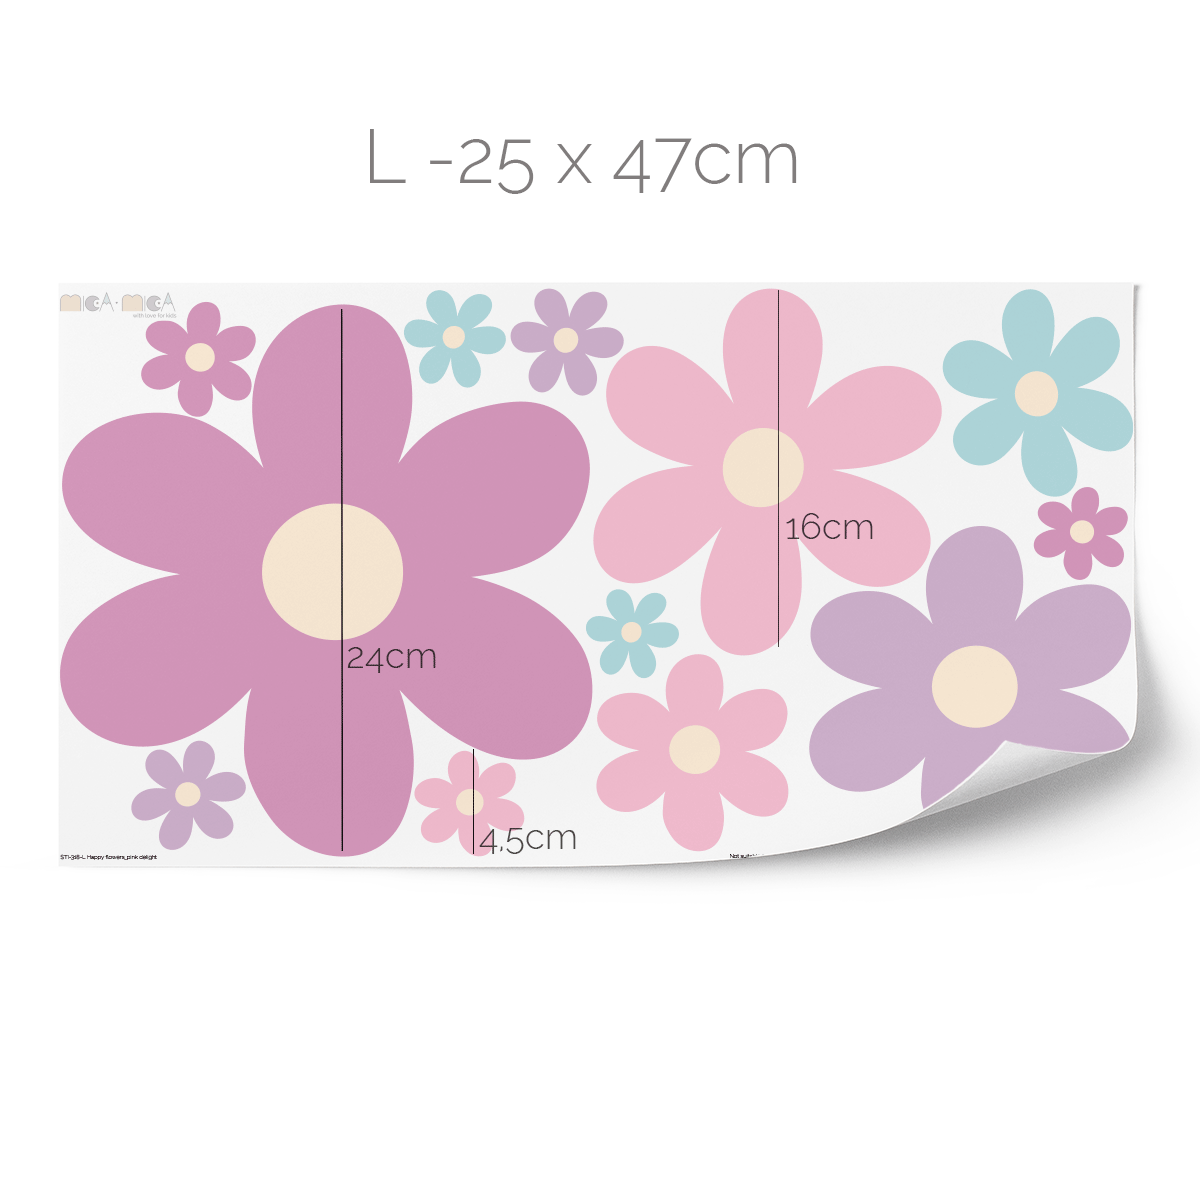 Flower wall stickers - Happy blooms (pink delight)